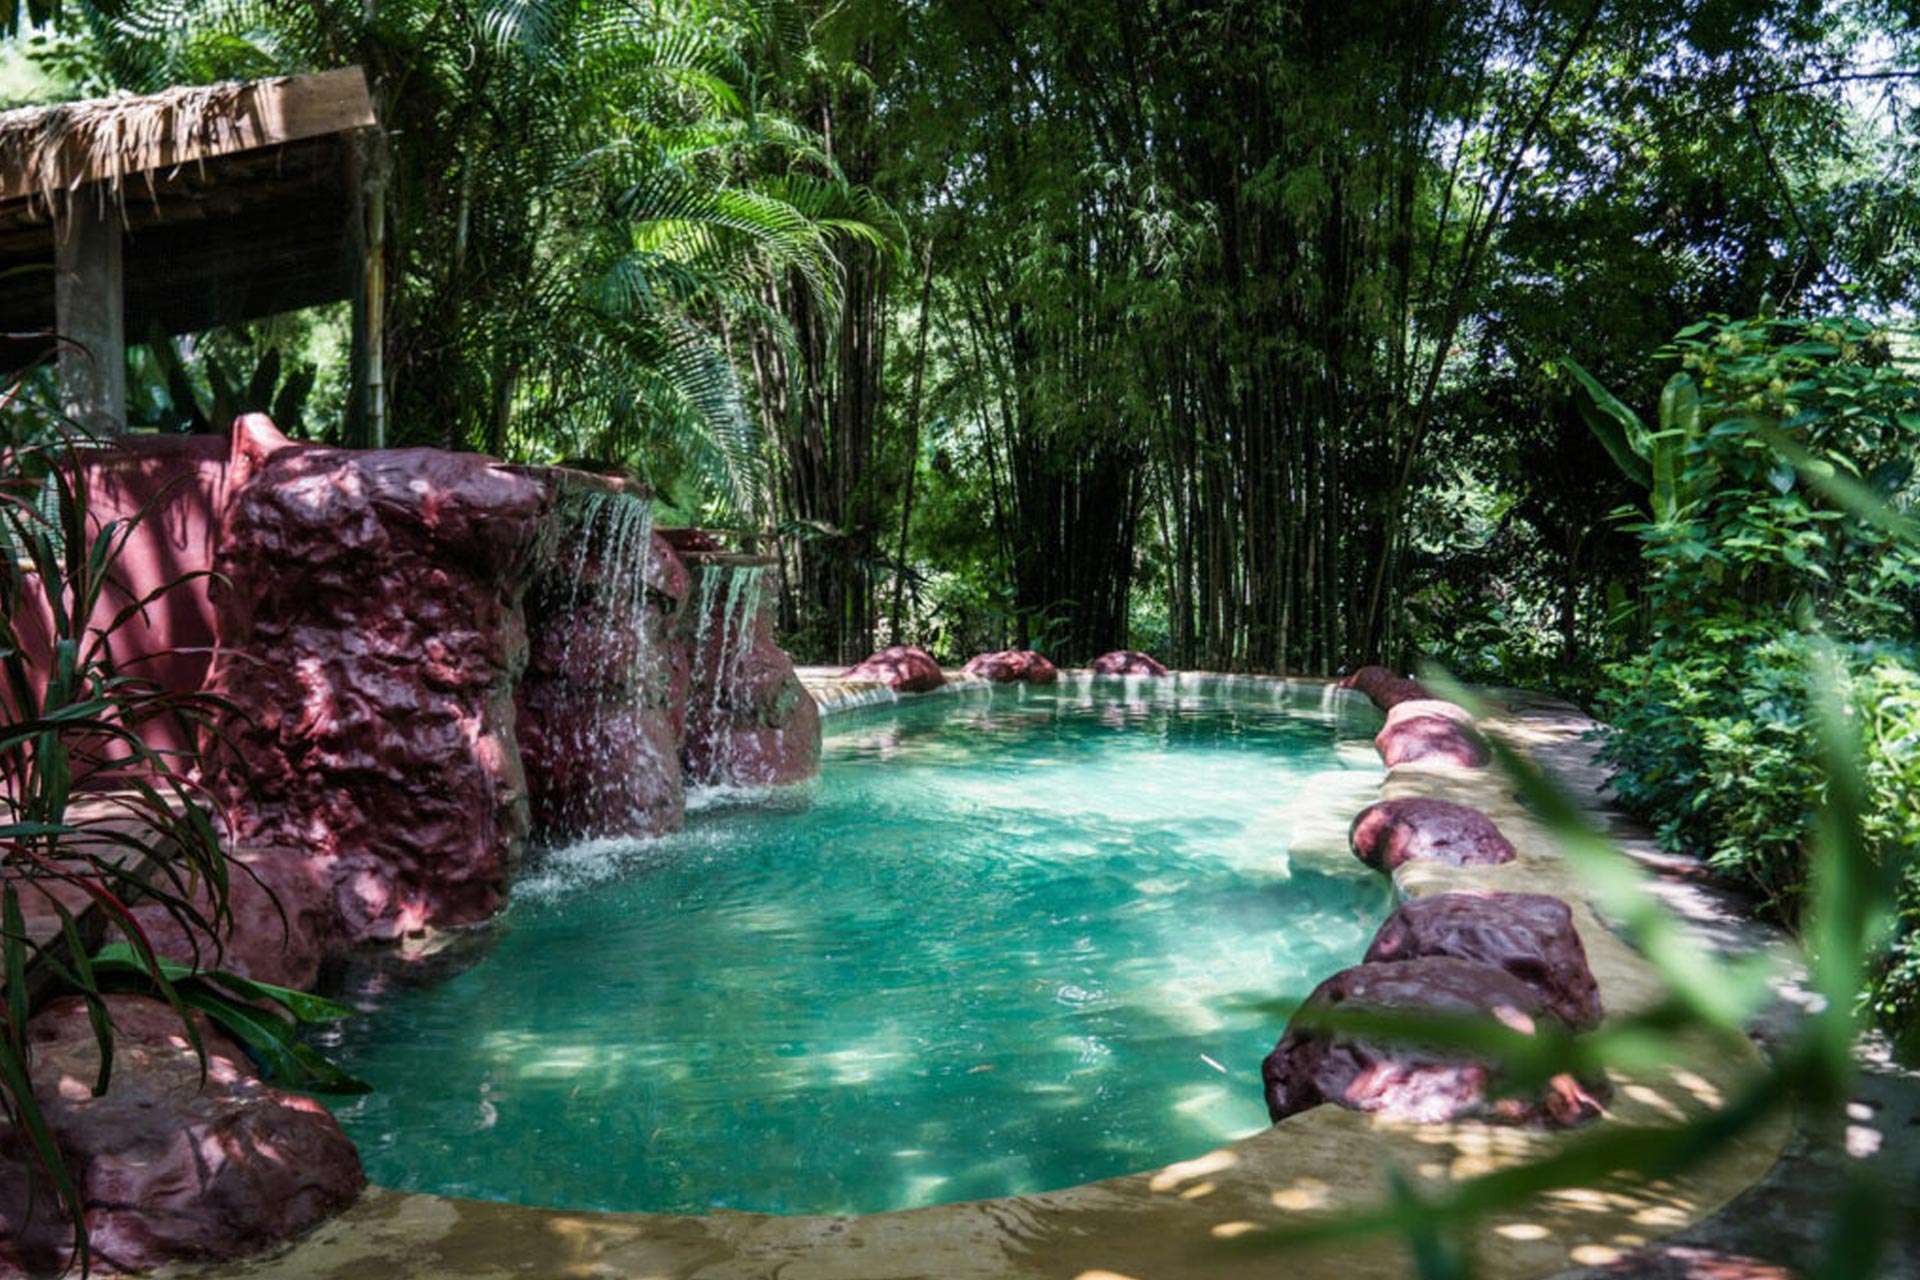 A swimming pool surrounded by lush greenery.